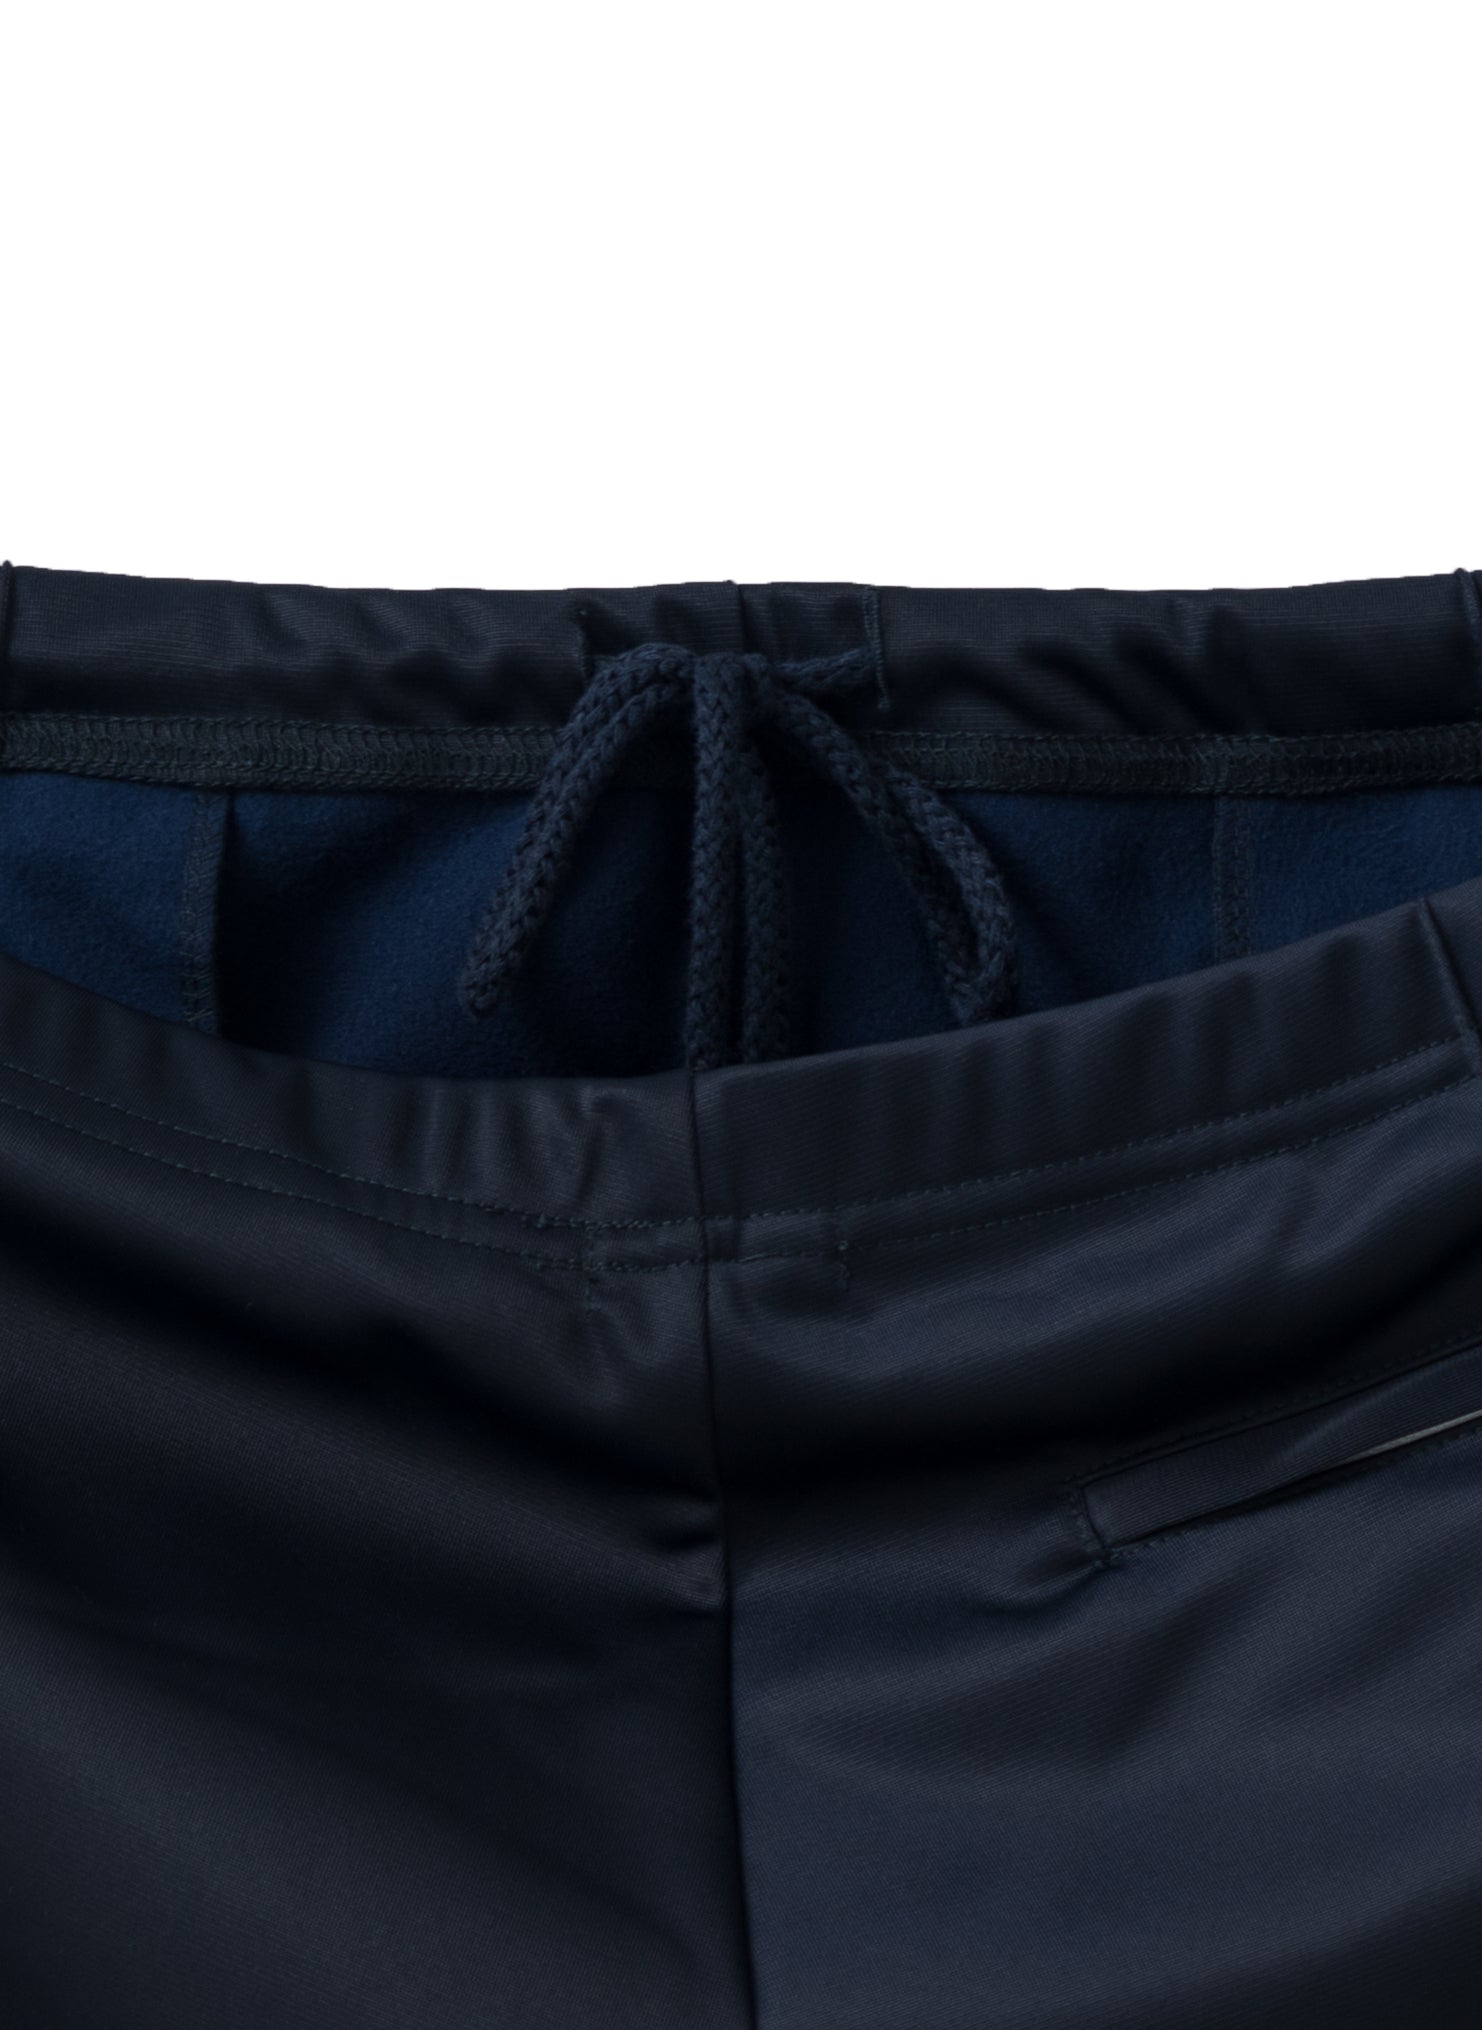 WILLY CHAVARRIA / BOOGIE NIGHT TRACK PANT NAVY